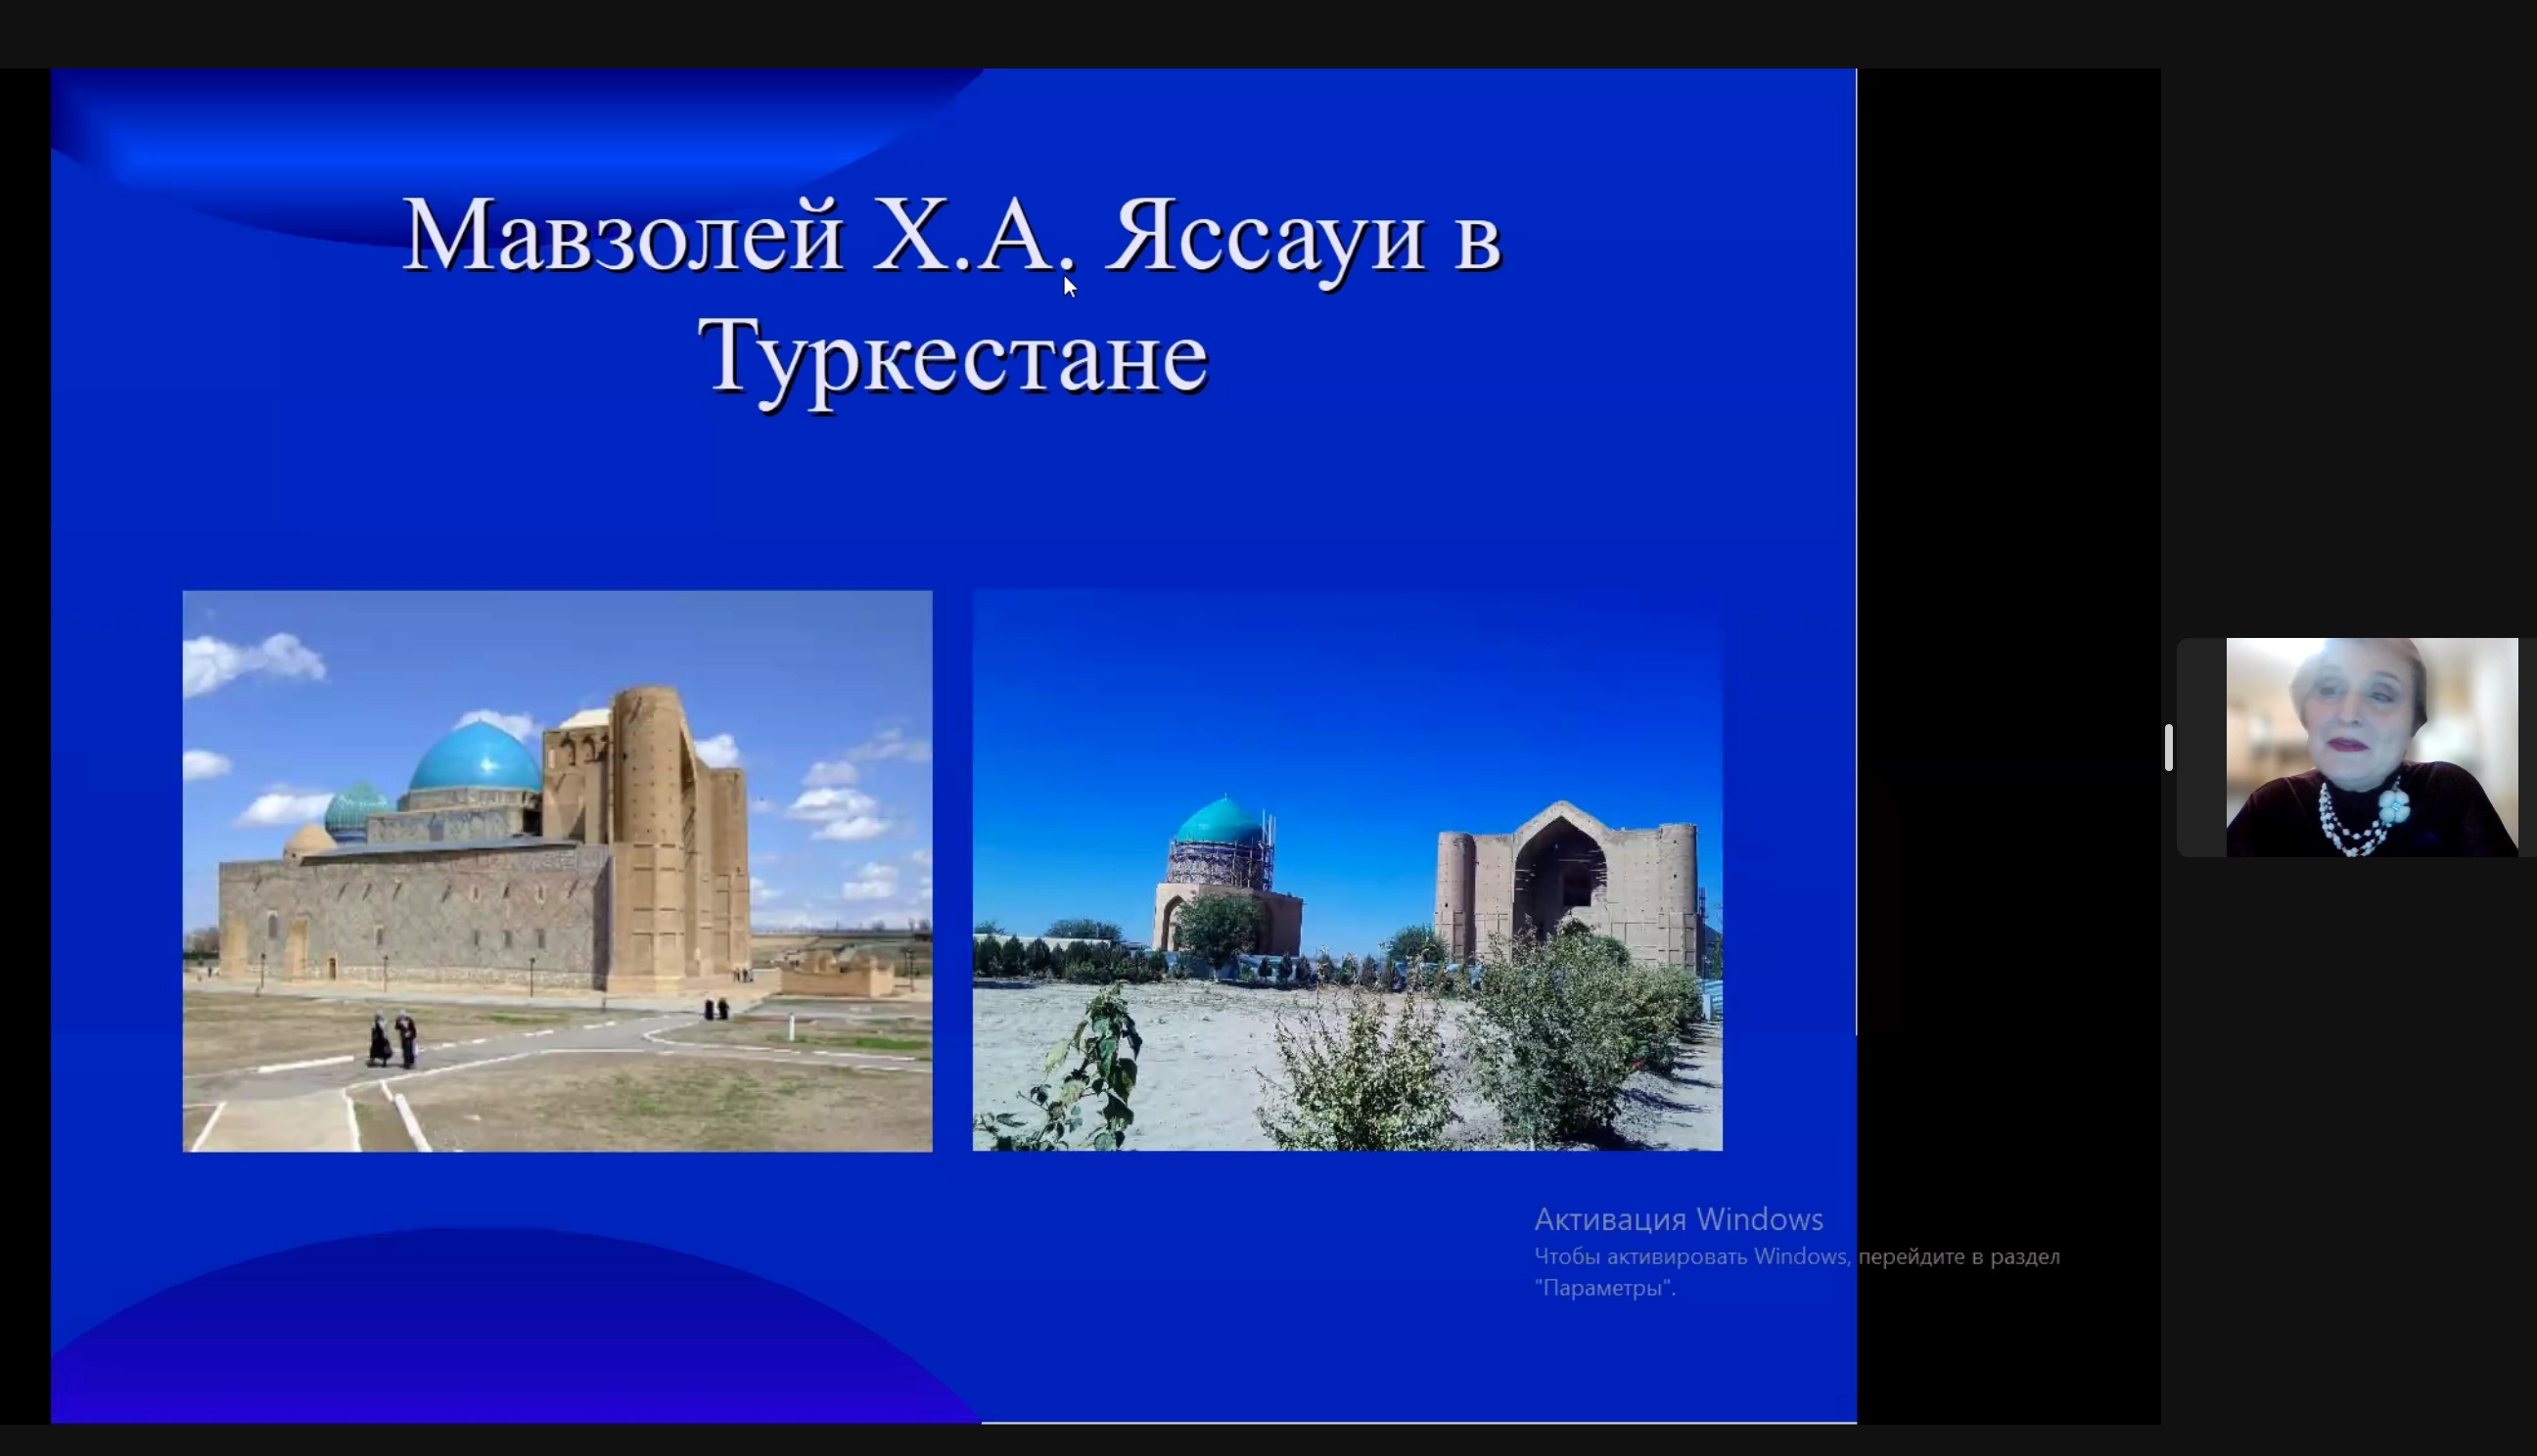 Lecture on Islamic art of Central Asia